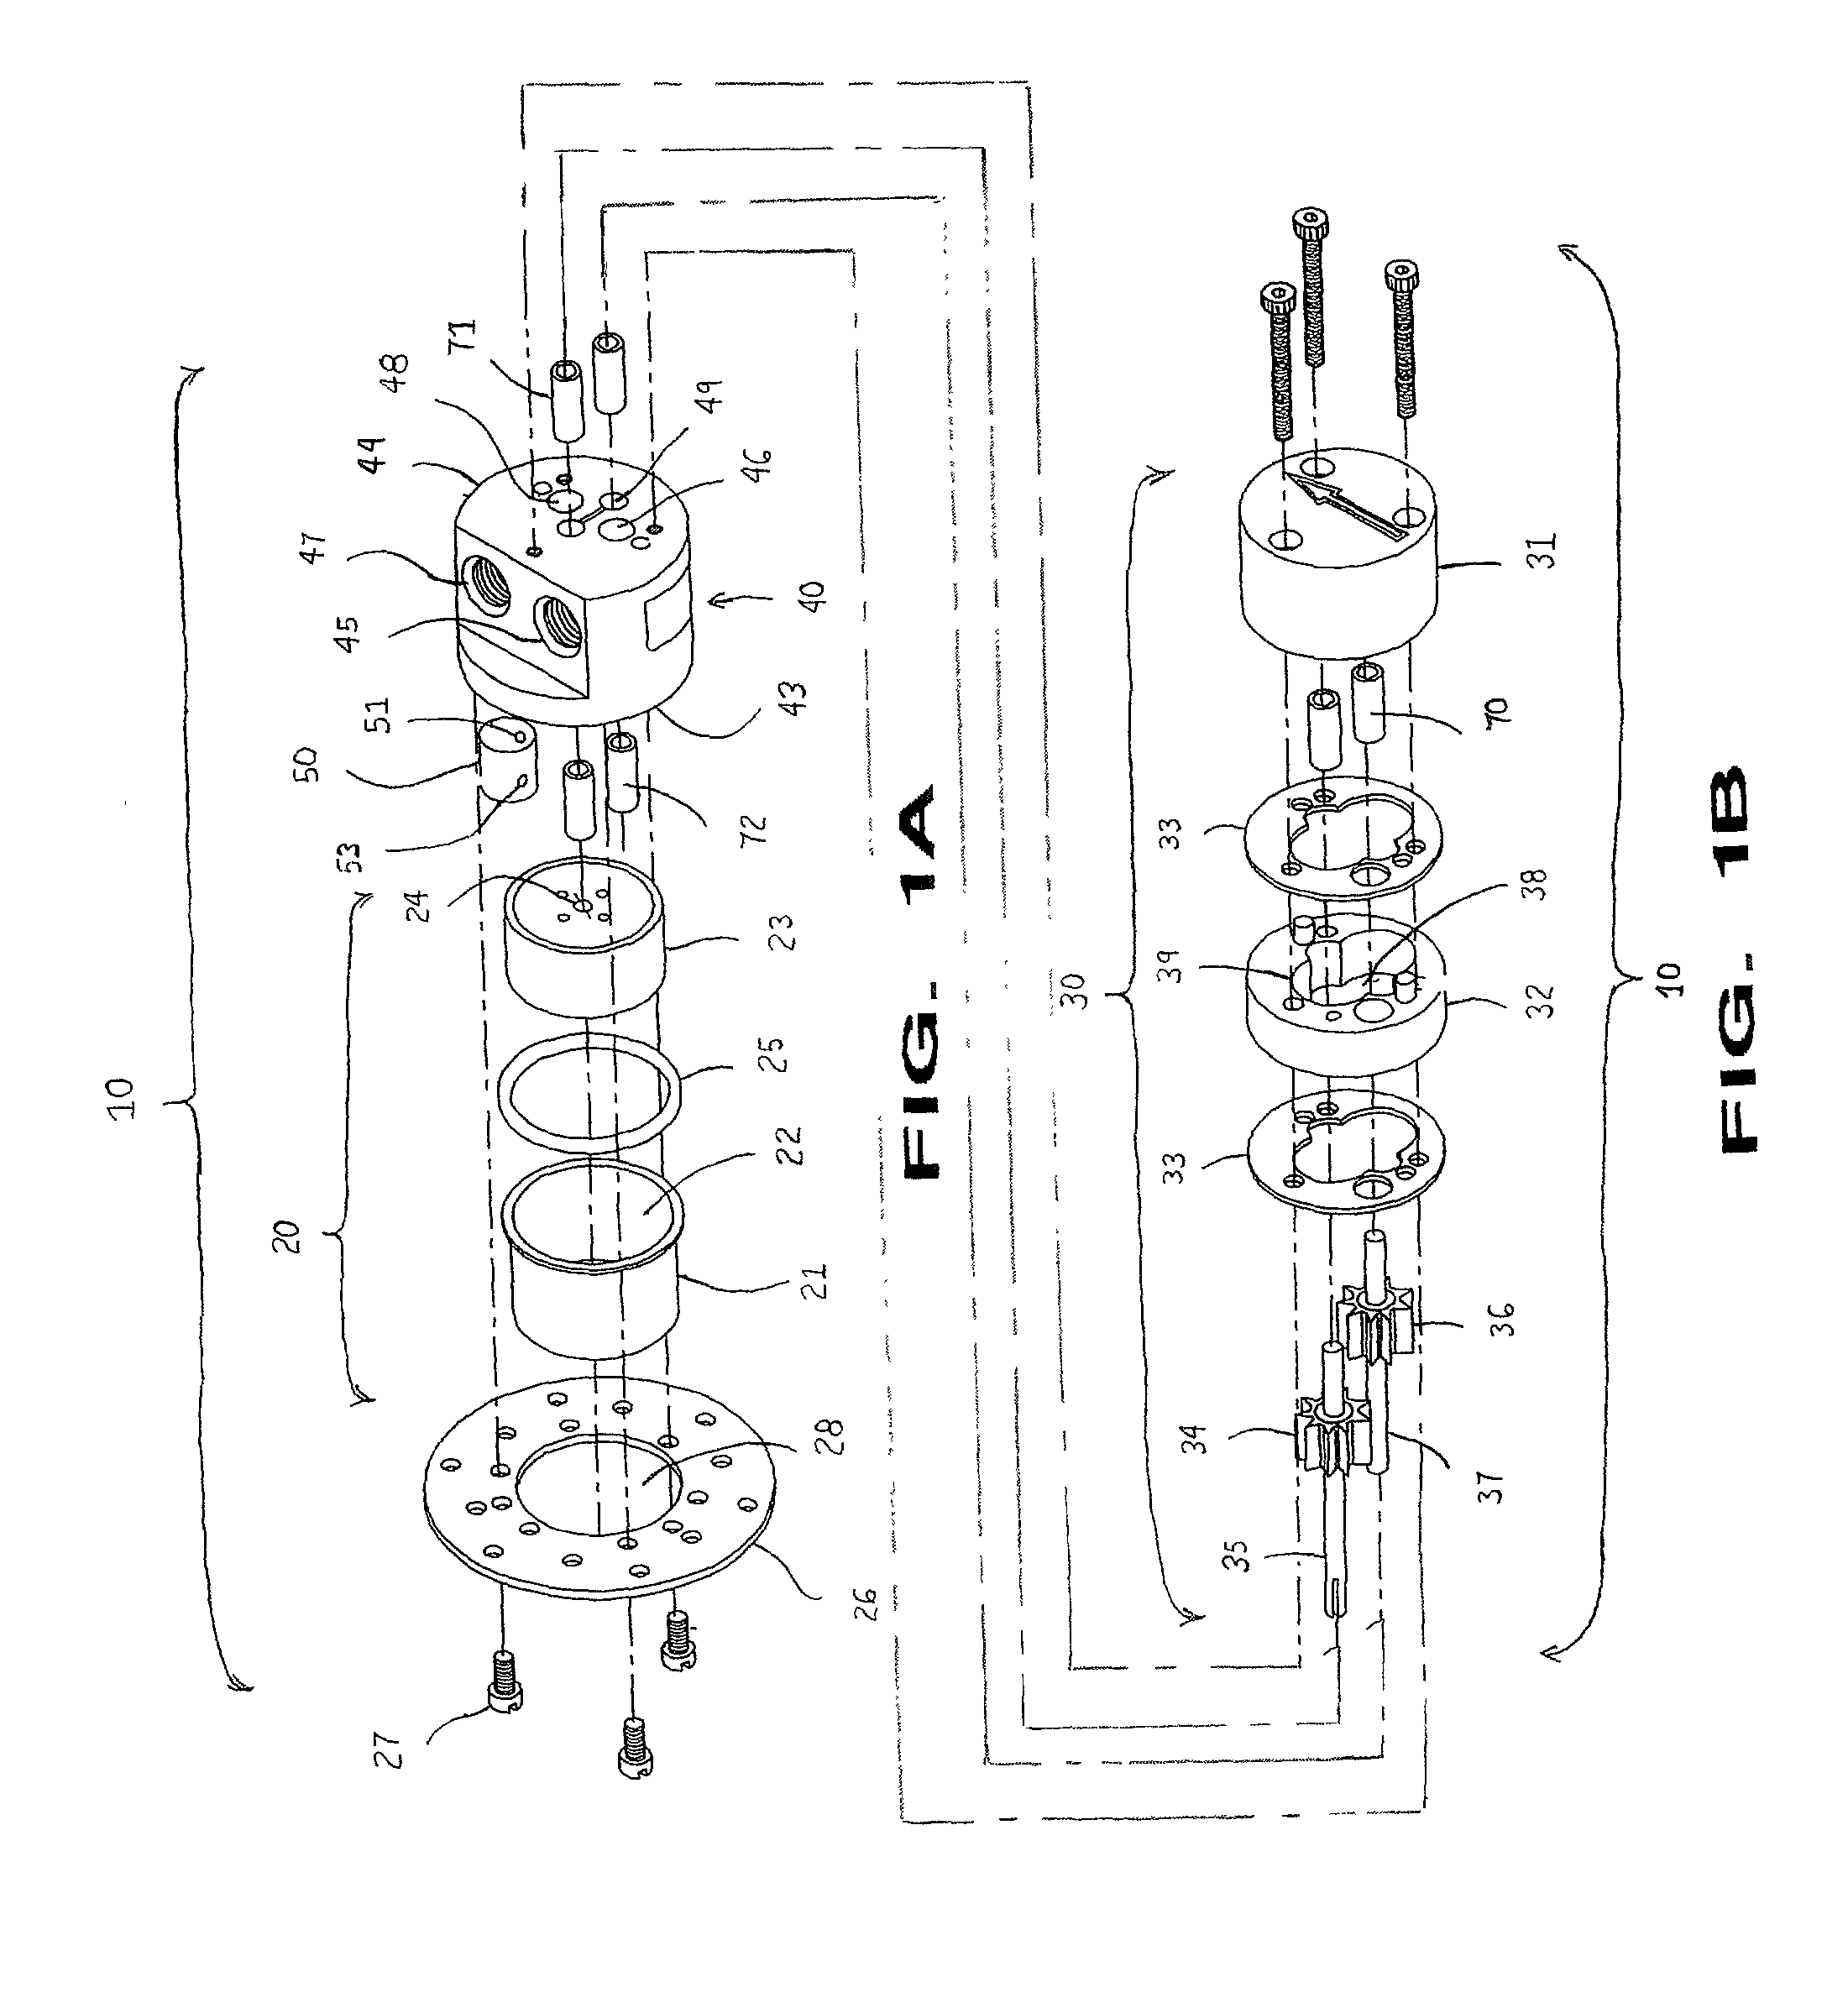 Devices and methods for noise suppression in pumps